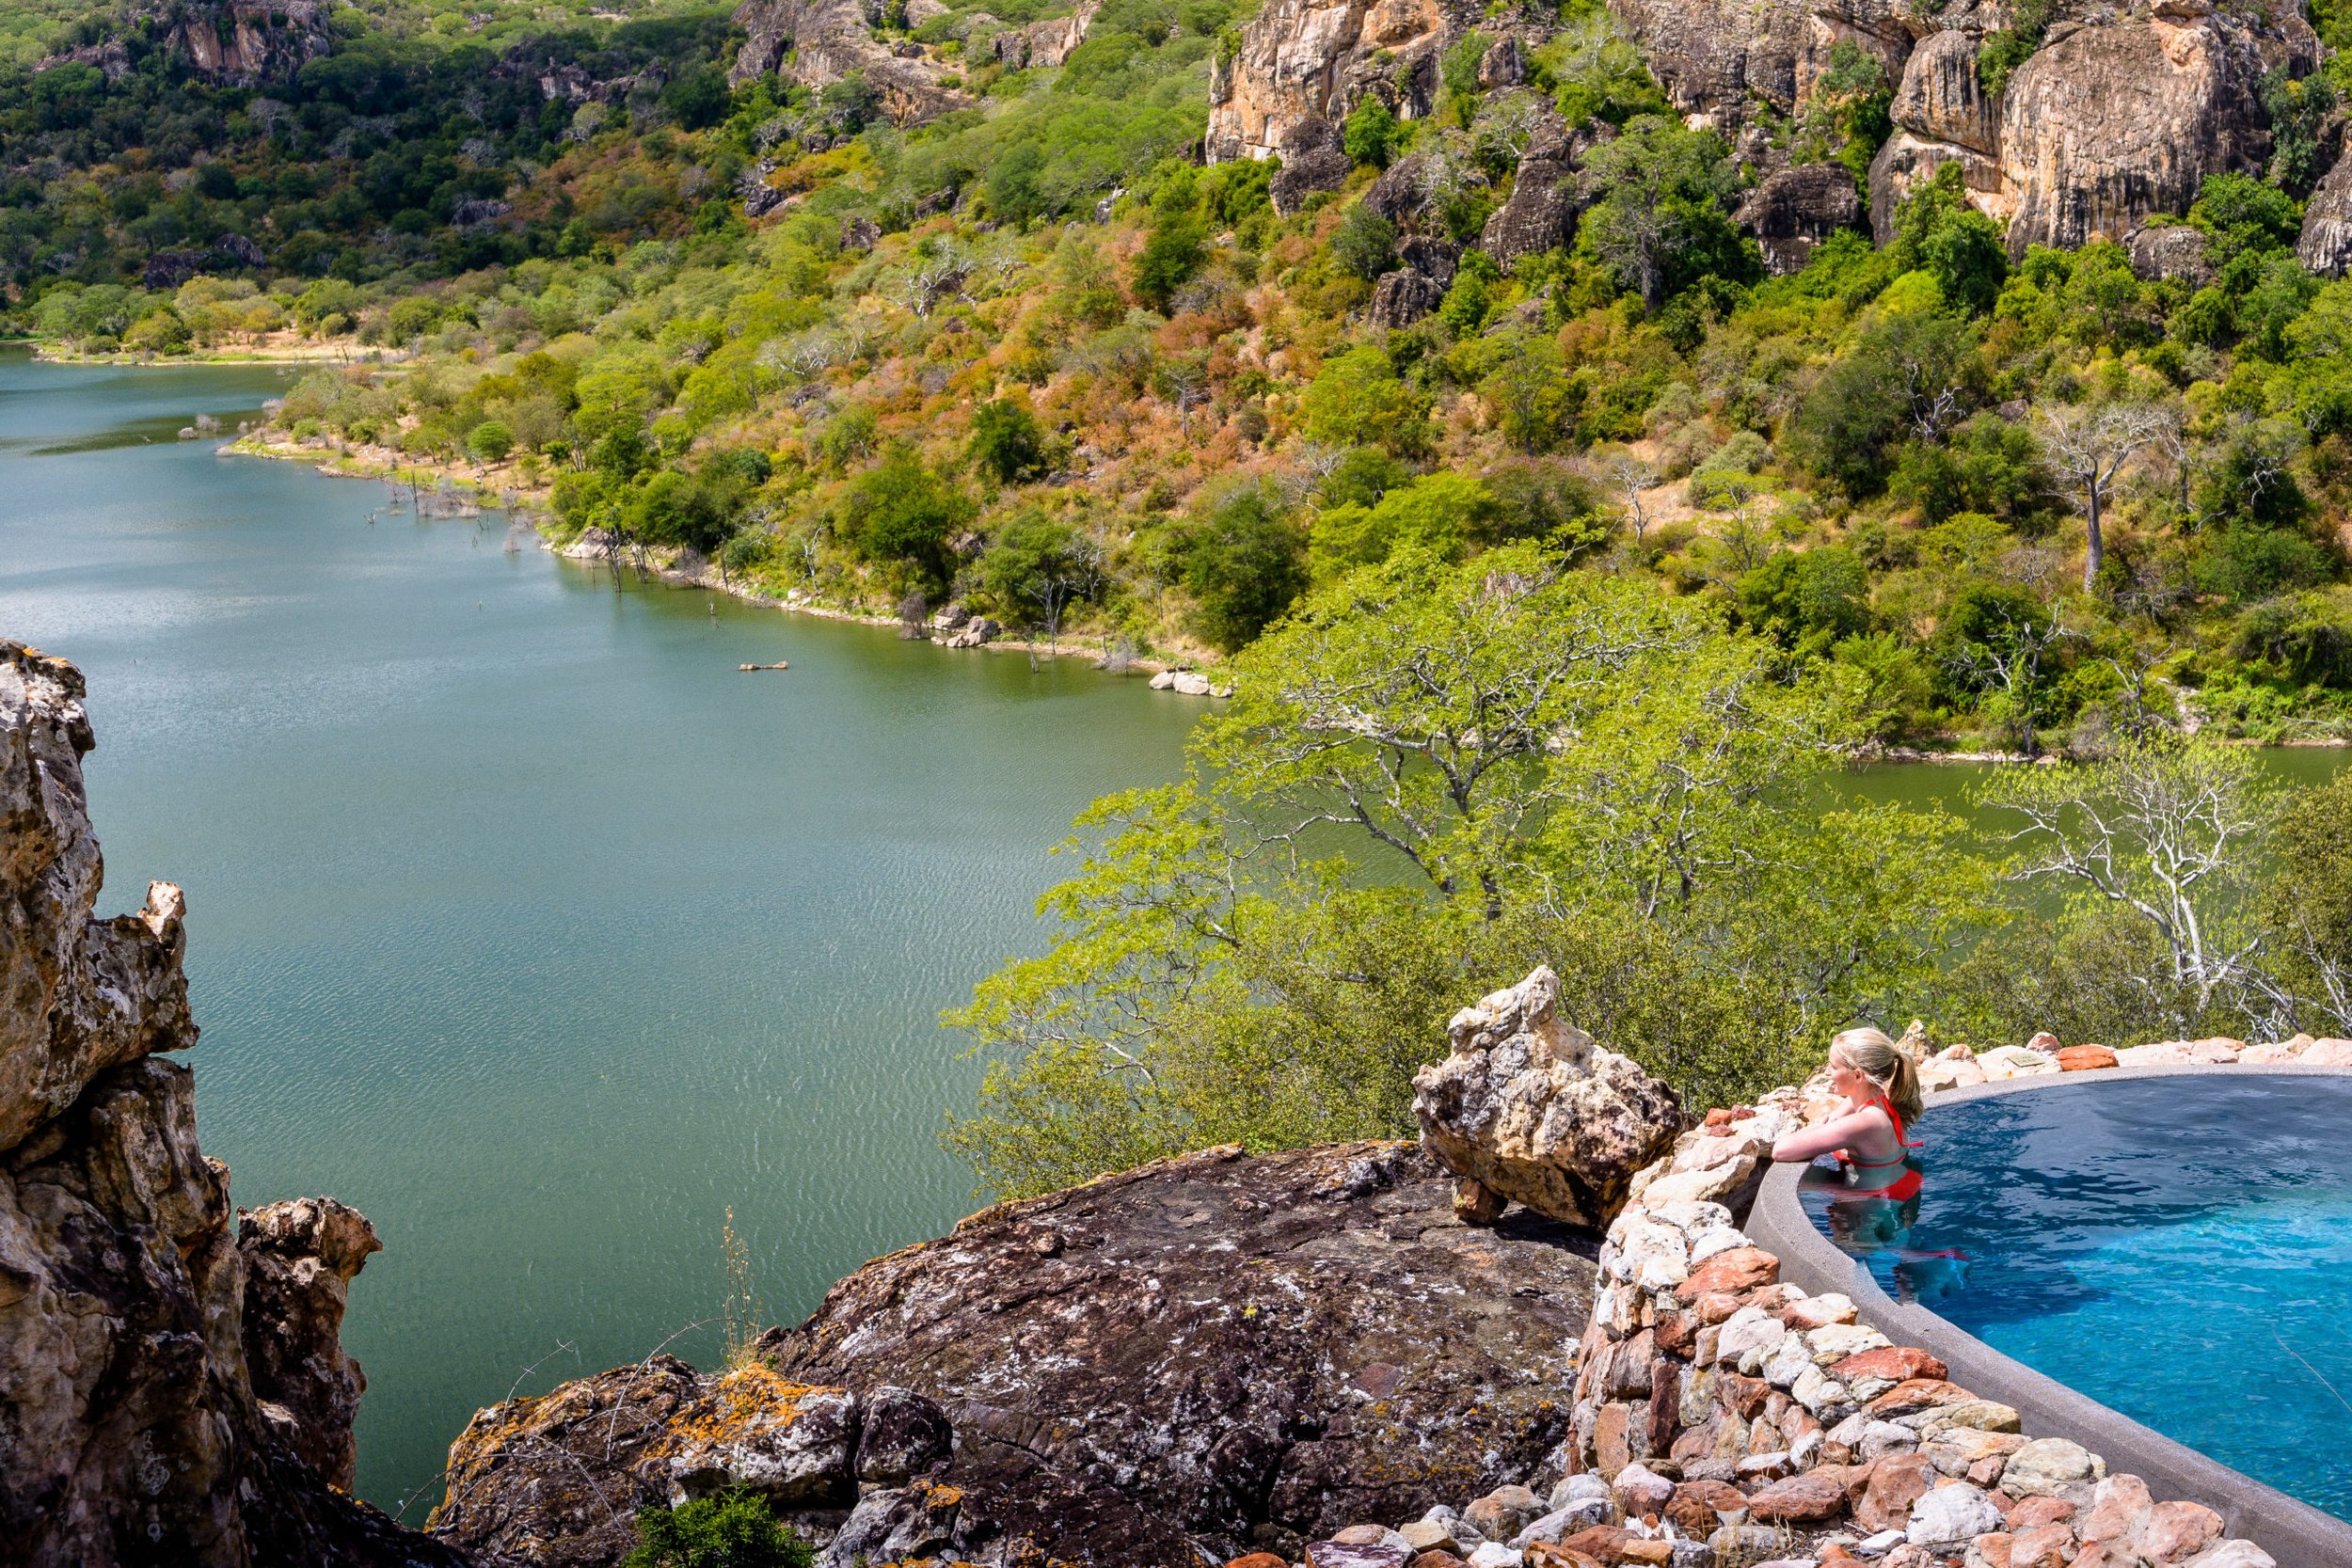 Pamu_Malilangwe-Dam-and-Swimming-Pool-with-Guest-overlooking-dam_Adriaan-Louw-scaled.jpg